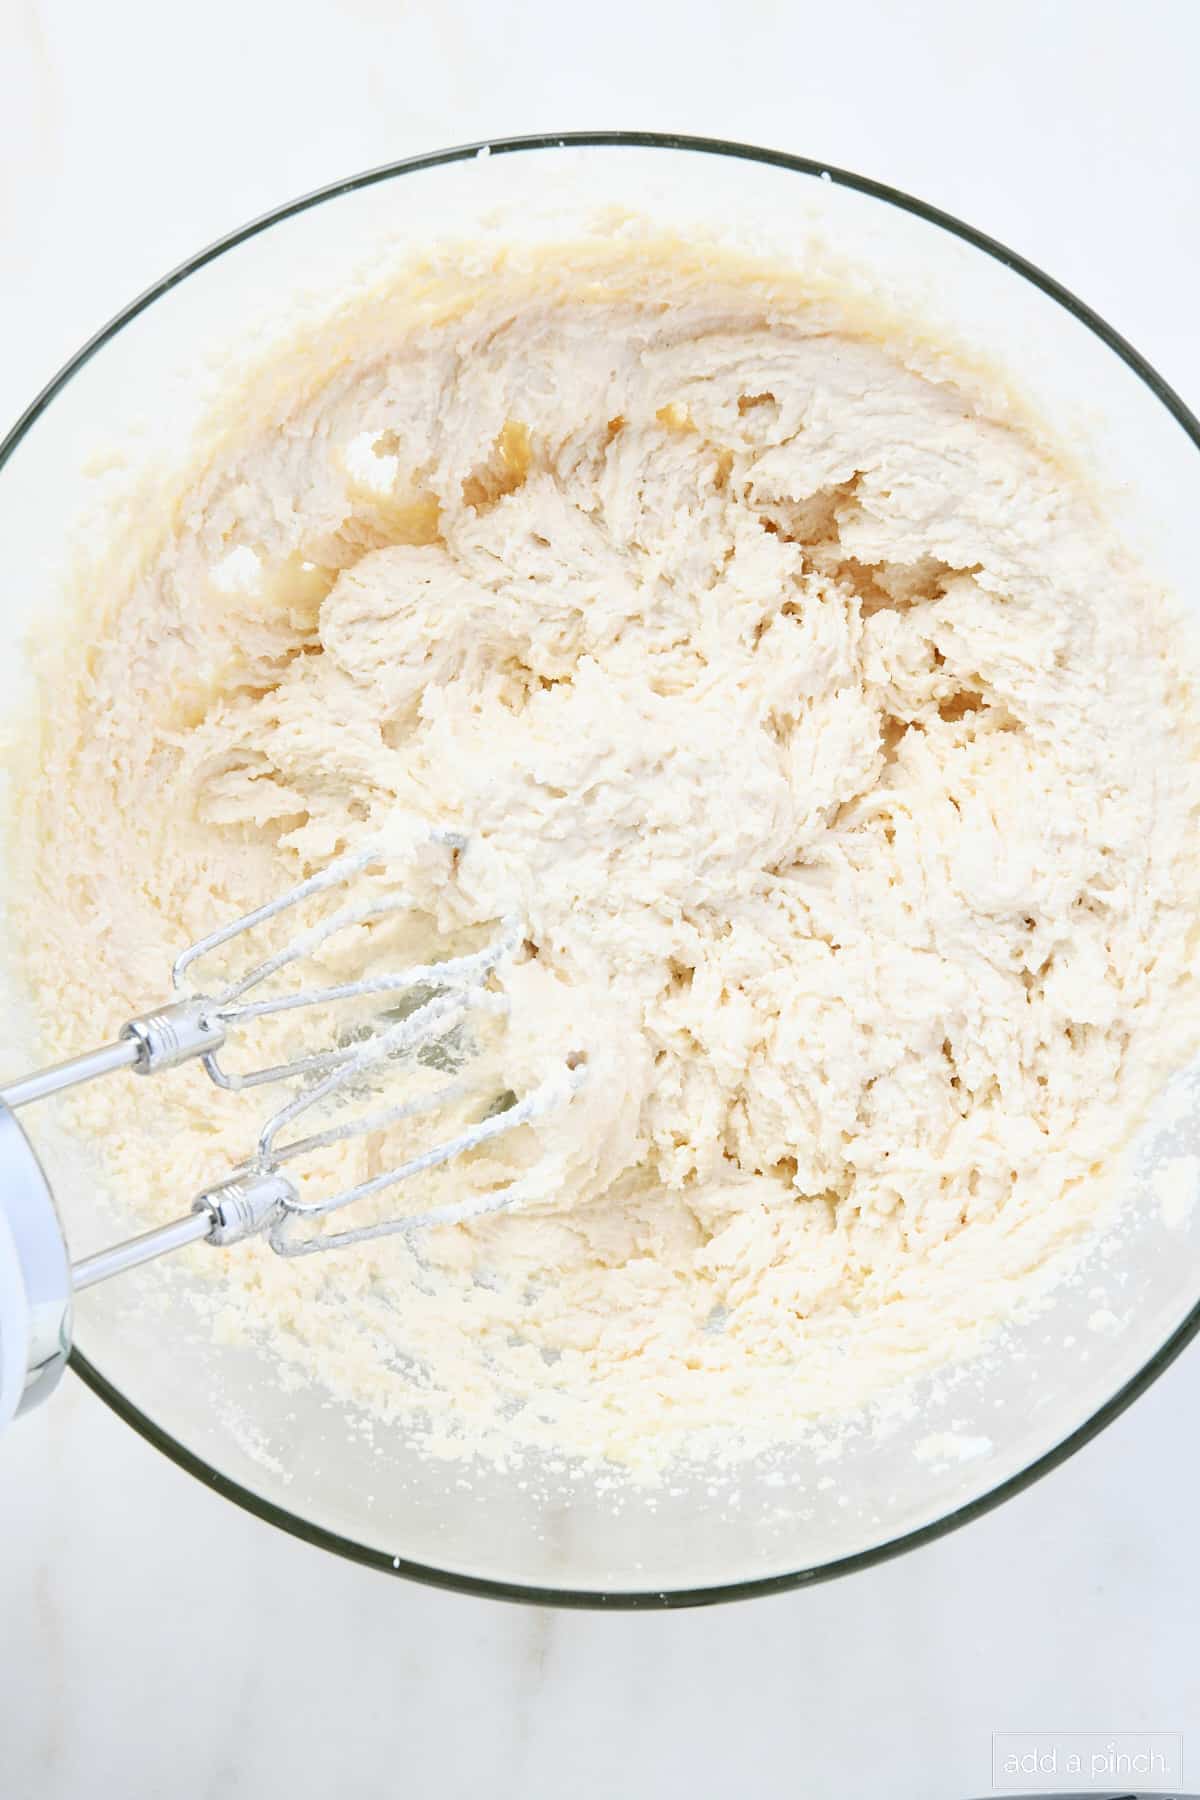 Light and fluffy creamed butter, sugar and shortening in a glass bowl with a. hand mixer inside.